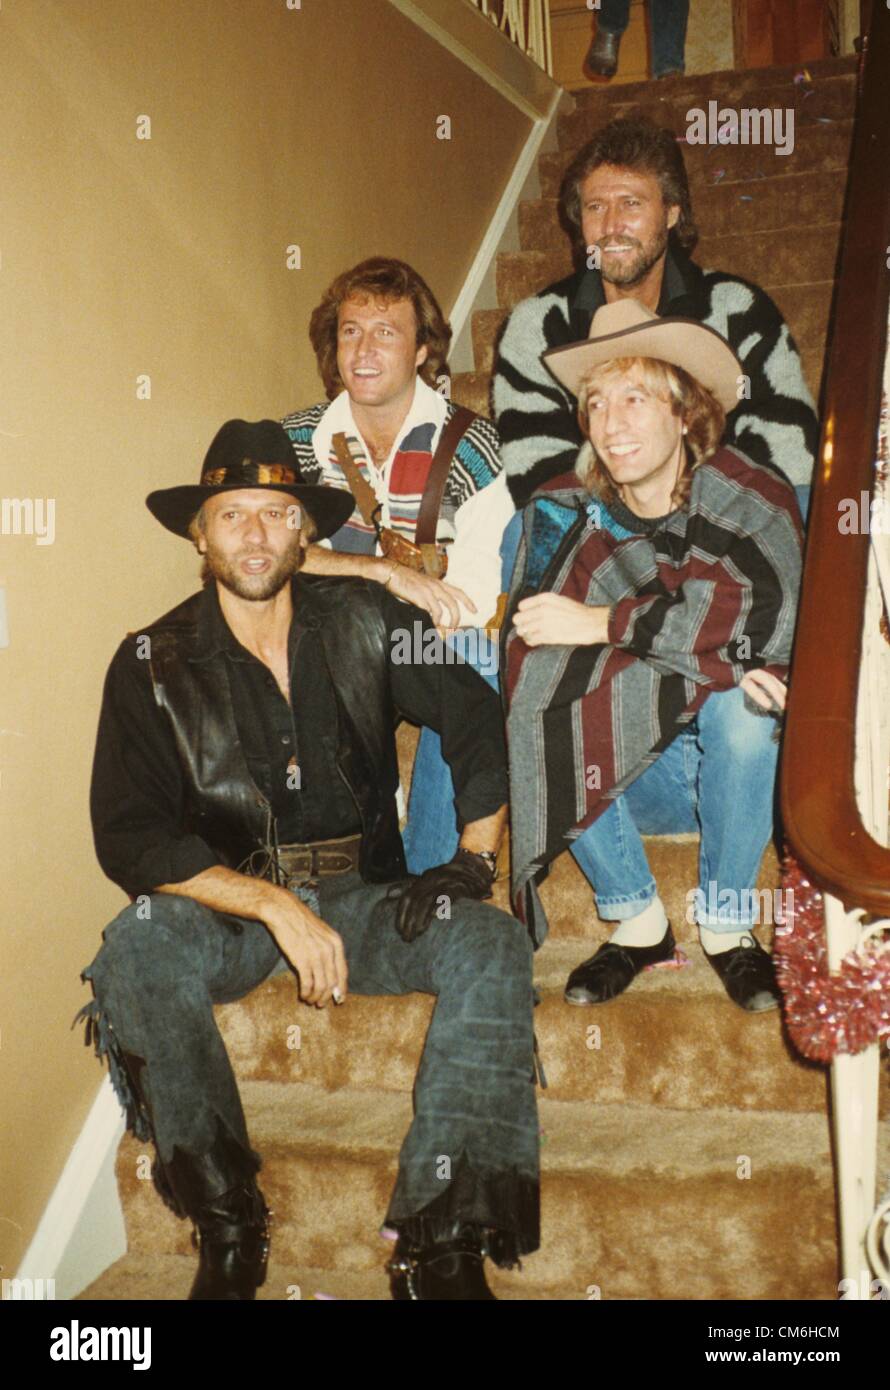 ANDY GIBB with Bee Gees.f6566.Supplied by   Photos, inc.(Credit Image: © Supplied By Globe Photos, Inc/Globe Photos/ZUMAPRESS.com) Stock Photo